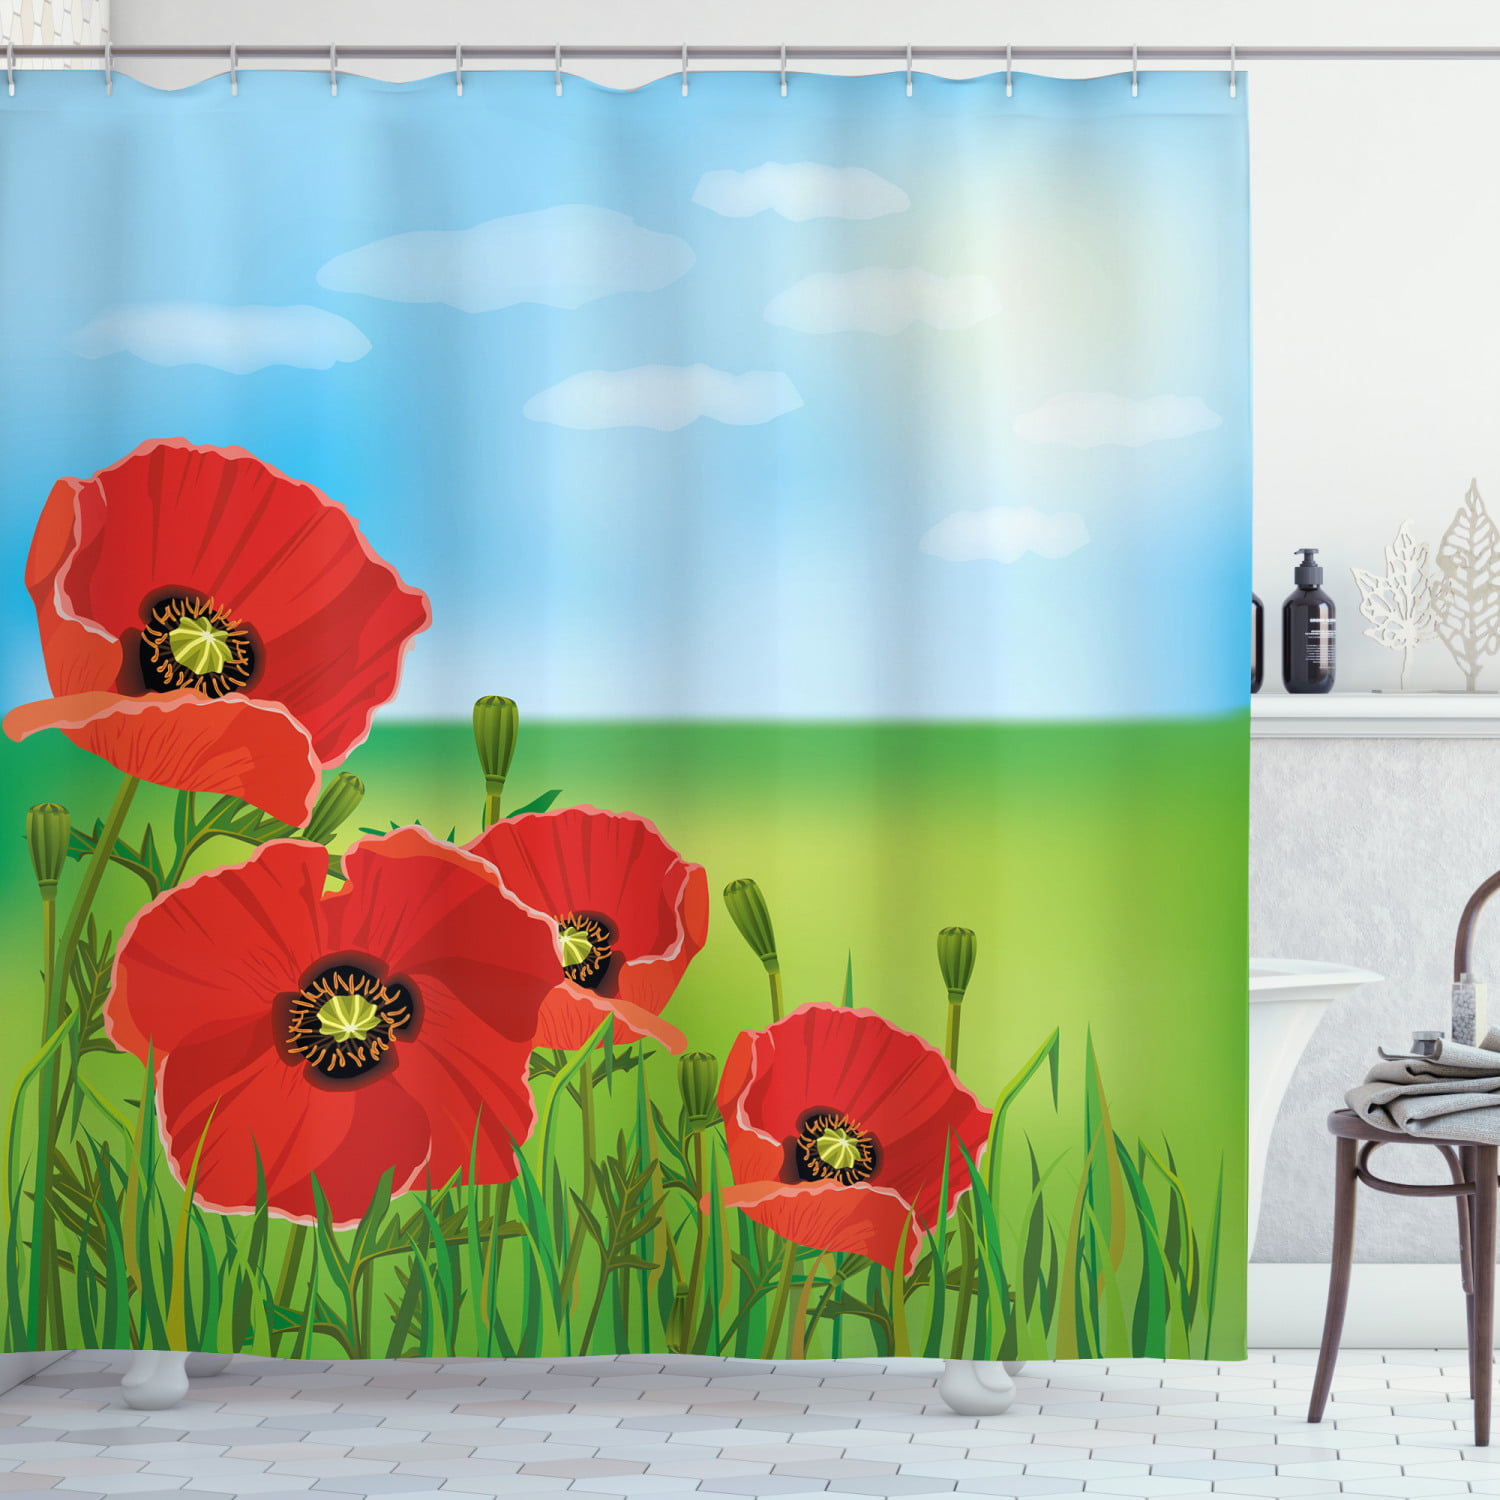 Poppy Shower Curtain Sunny Day Is Upon, Red Poppy Shower Curtain Hooks